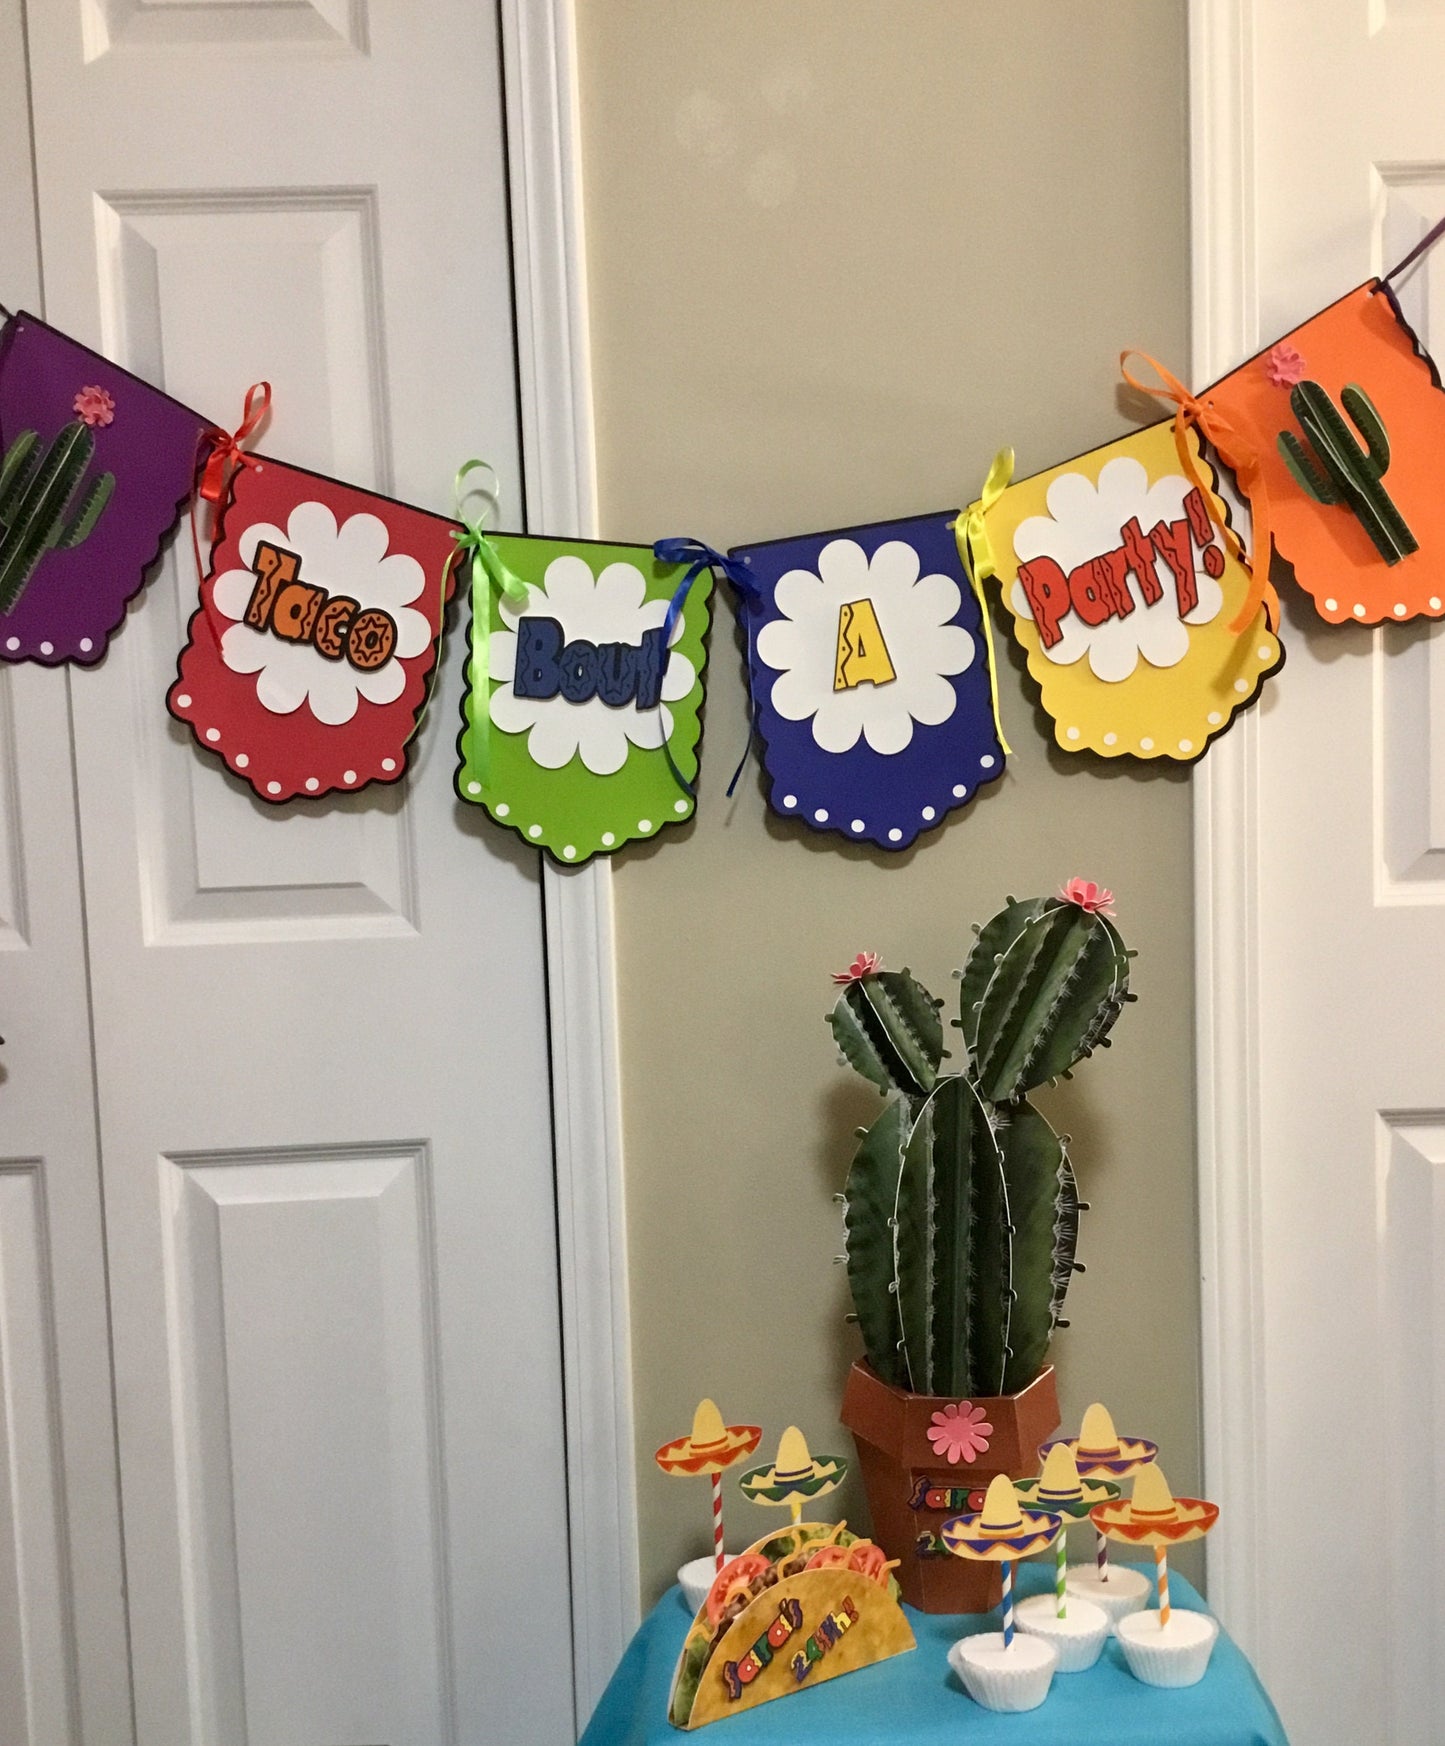 Taco Bout A Party Banner/ Fiesta Party Banner